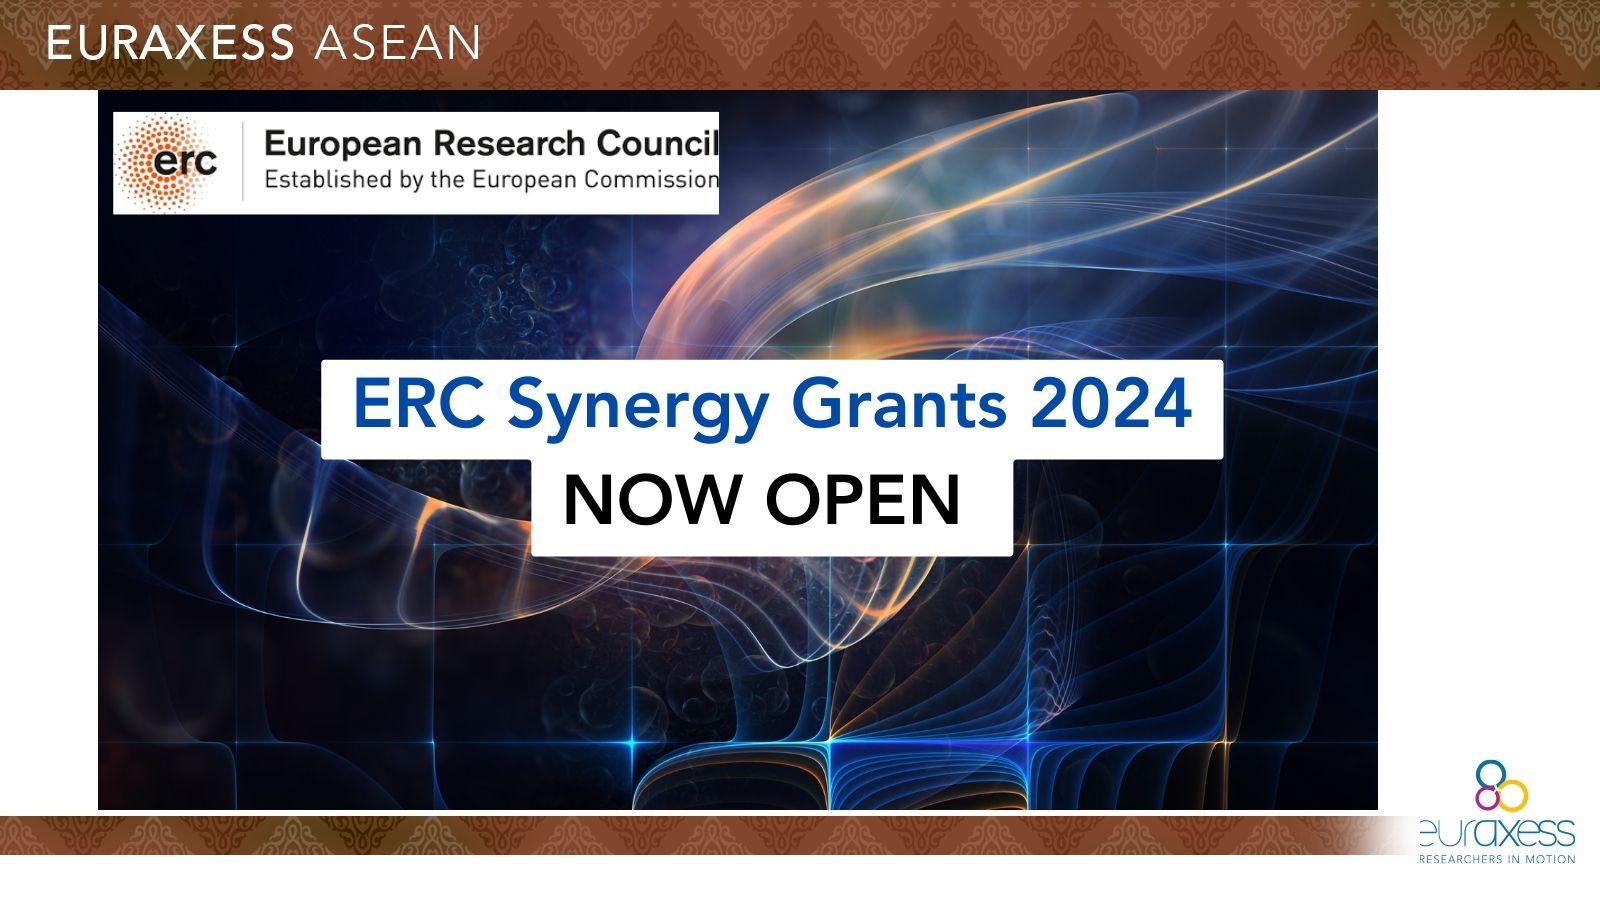 ERC Synergy Grants 2024 (up to a maximum of € 10 million for a period